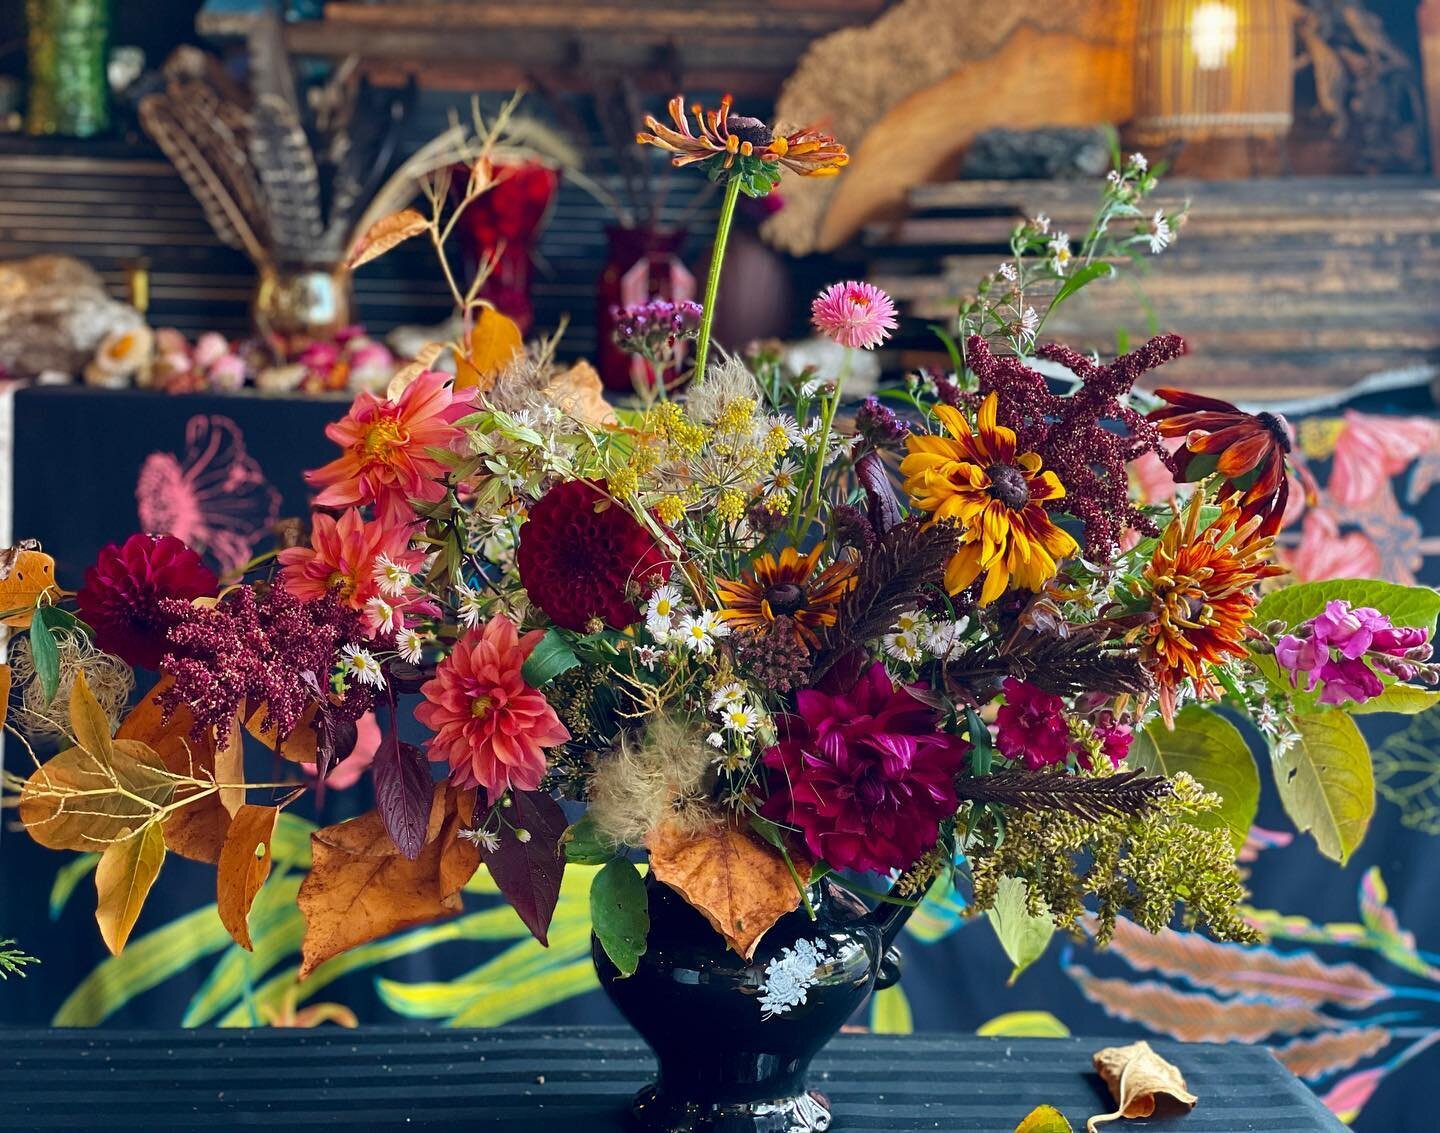 The last arrangements of the season. A very late frost came in the early hours of Tuesday, and for the most part, bid the season farewell. It&rsquo;s been super fun creating weekly florals for @wtdiner, @hidden_gem_hudson 
&amp; @taconicwineandspirit